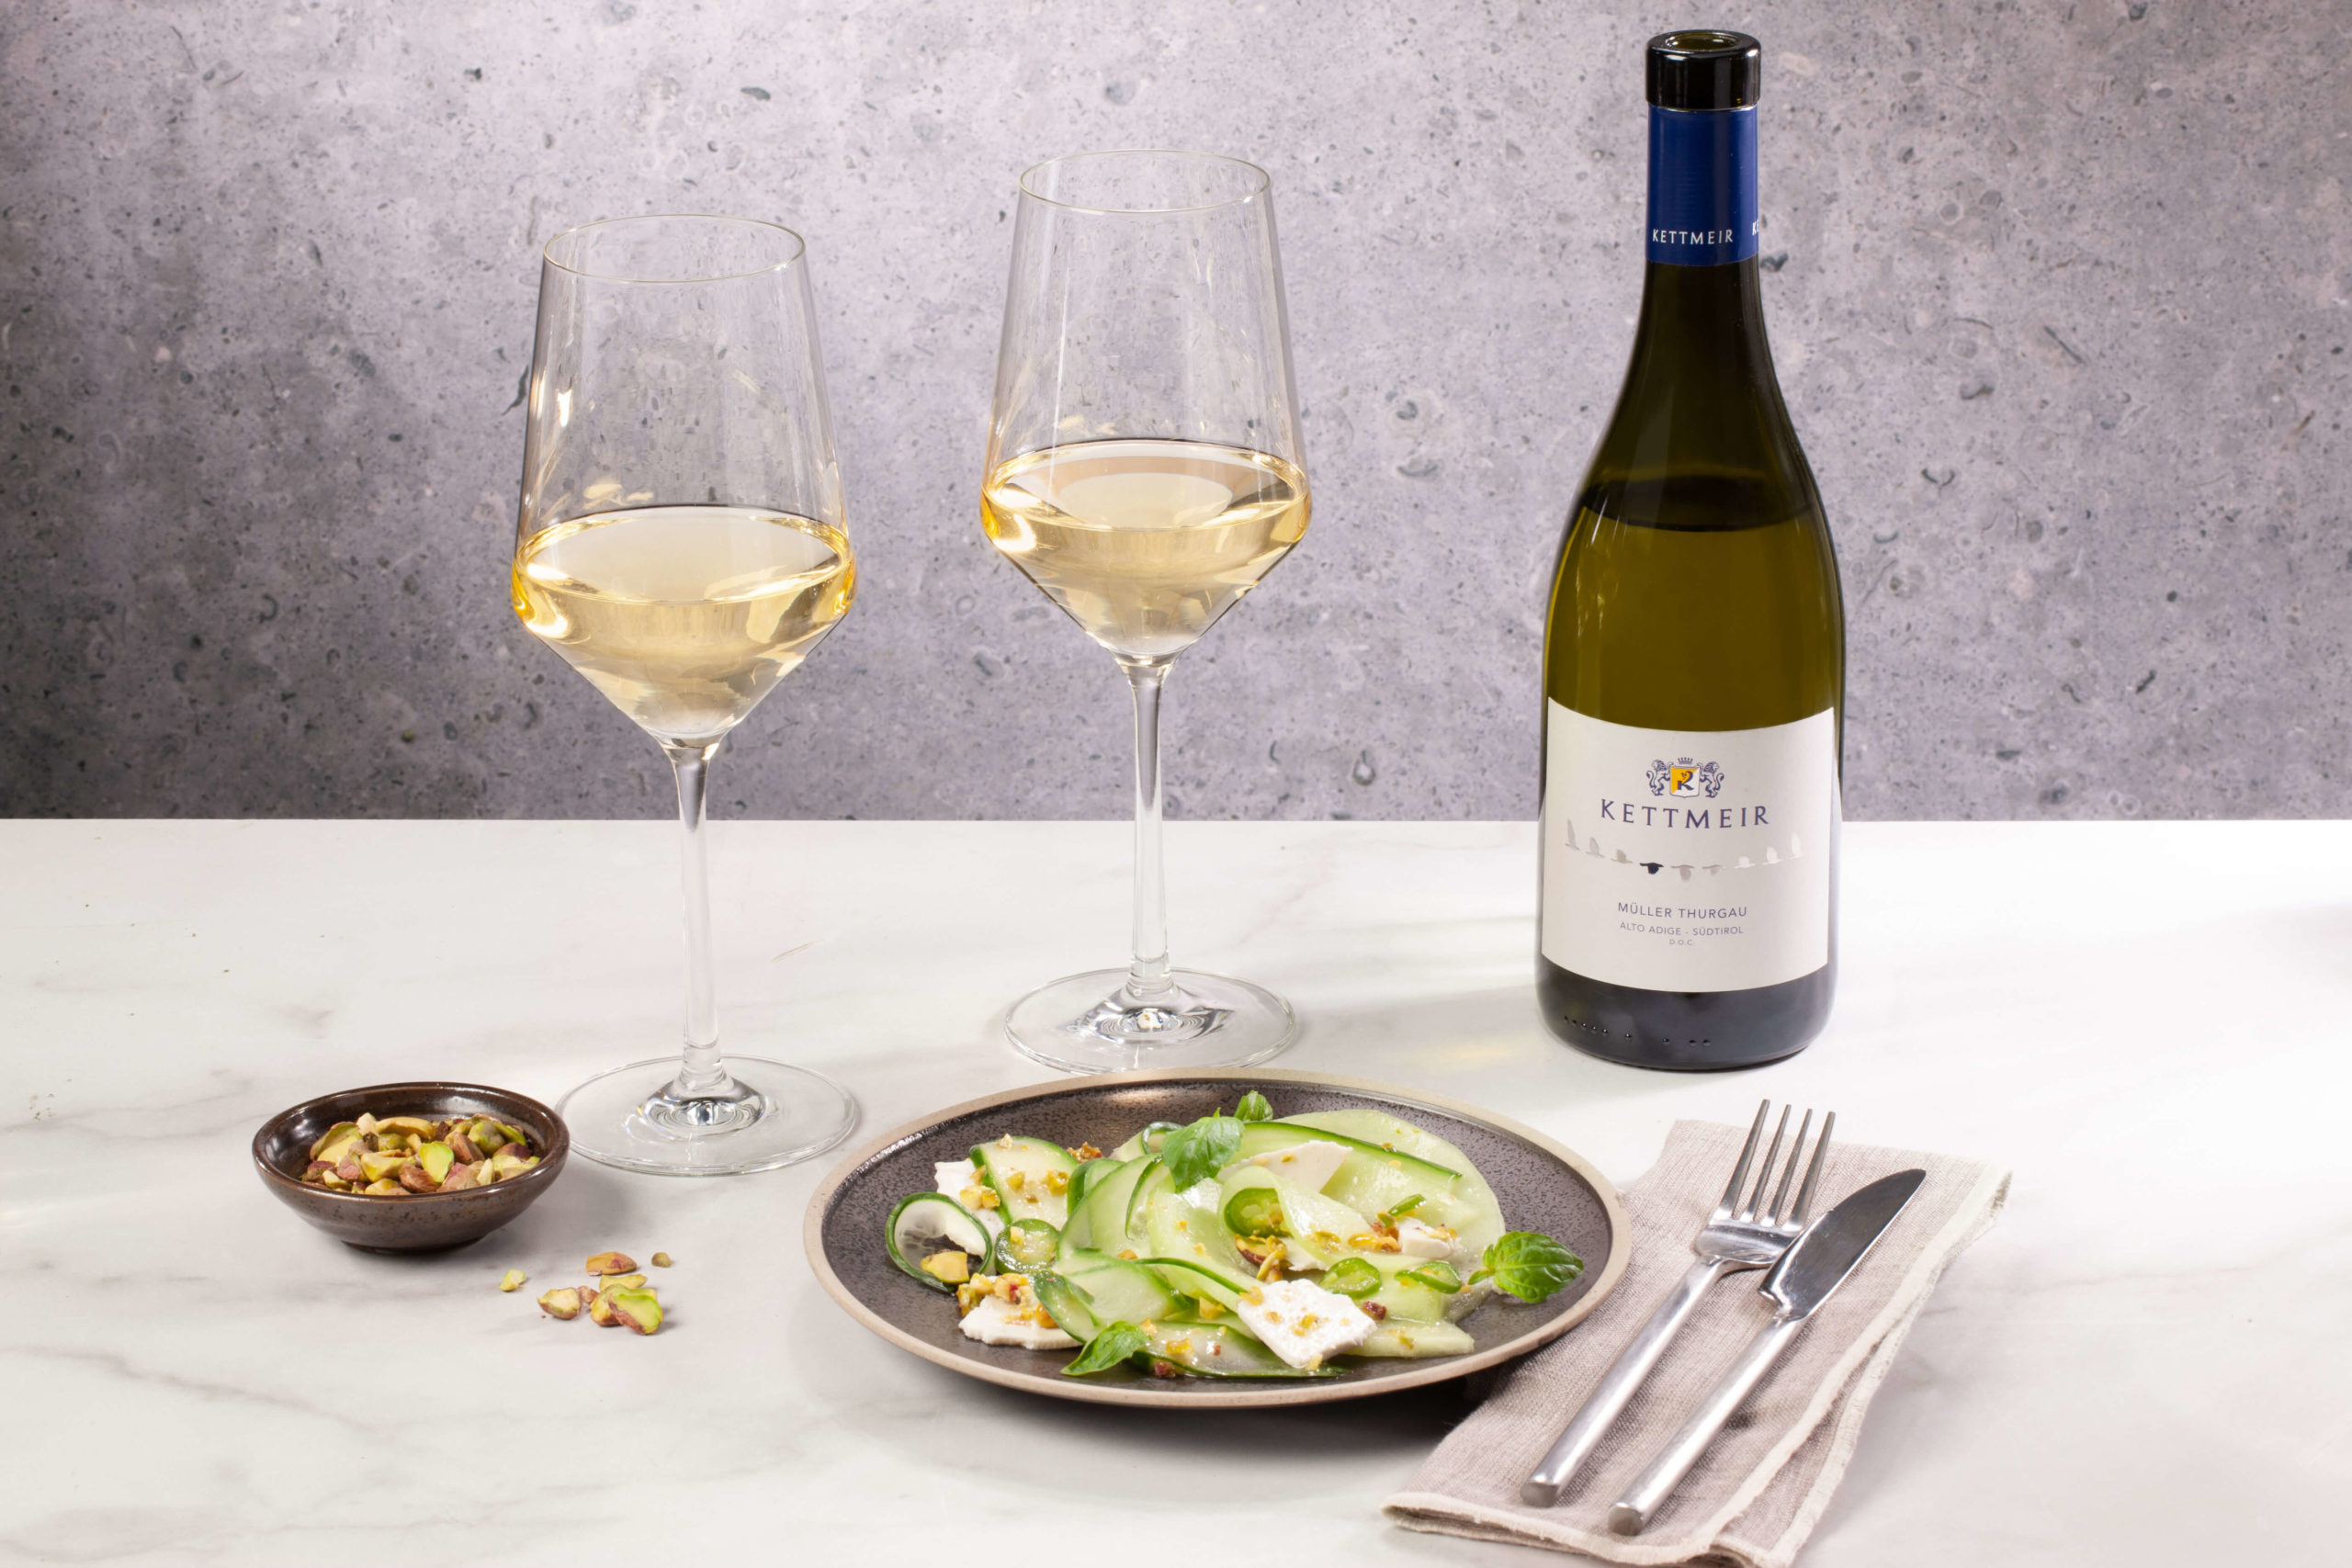 Recipes of a dish paired with a bottled of Kettmeir wine